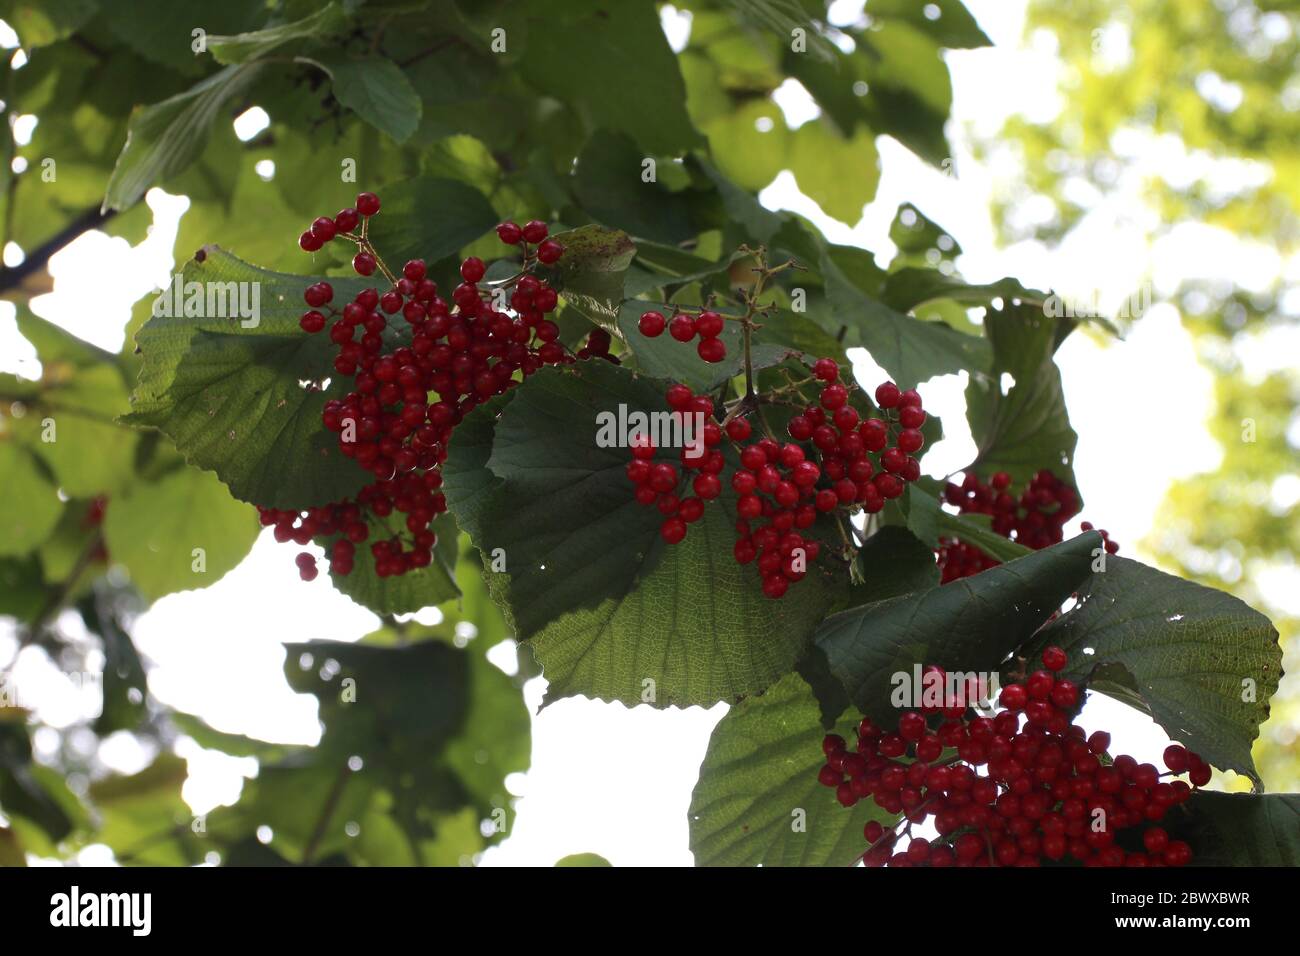 Clusters of red berries and broadleaves of a Viburnum dilatatum Cardinal Candy shrub in the fall in North Carolina, USA Stock Photo